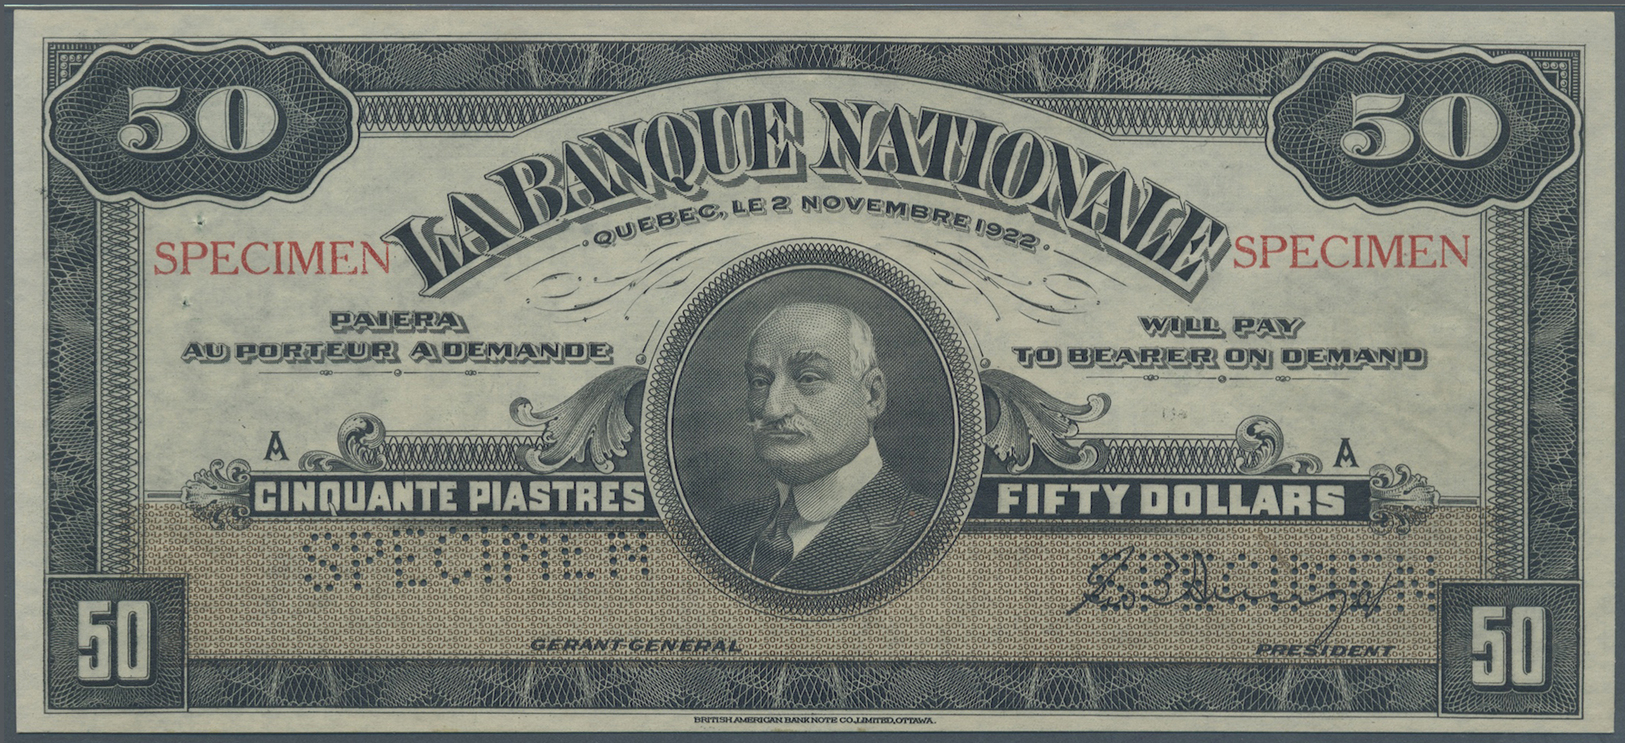 00487 Canada: La Banque Nationale 50 Dollars 1922 SPECIMEN, P.S874s In Excellent Condition, Just Slightly Decentered Fro - Canada